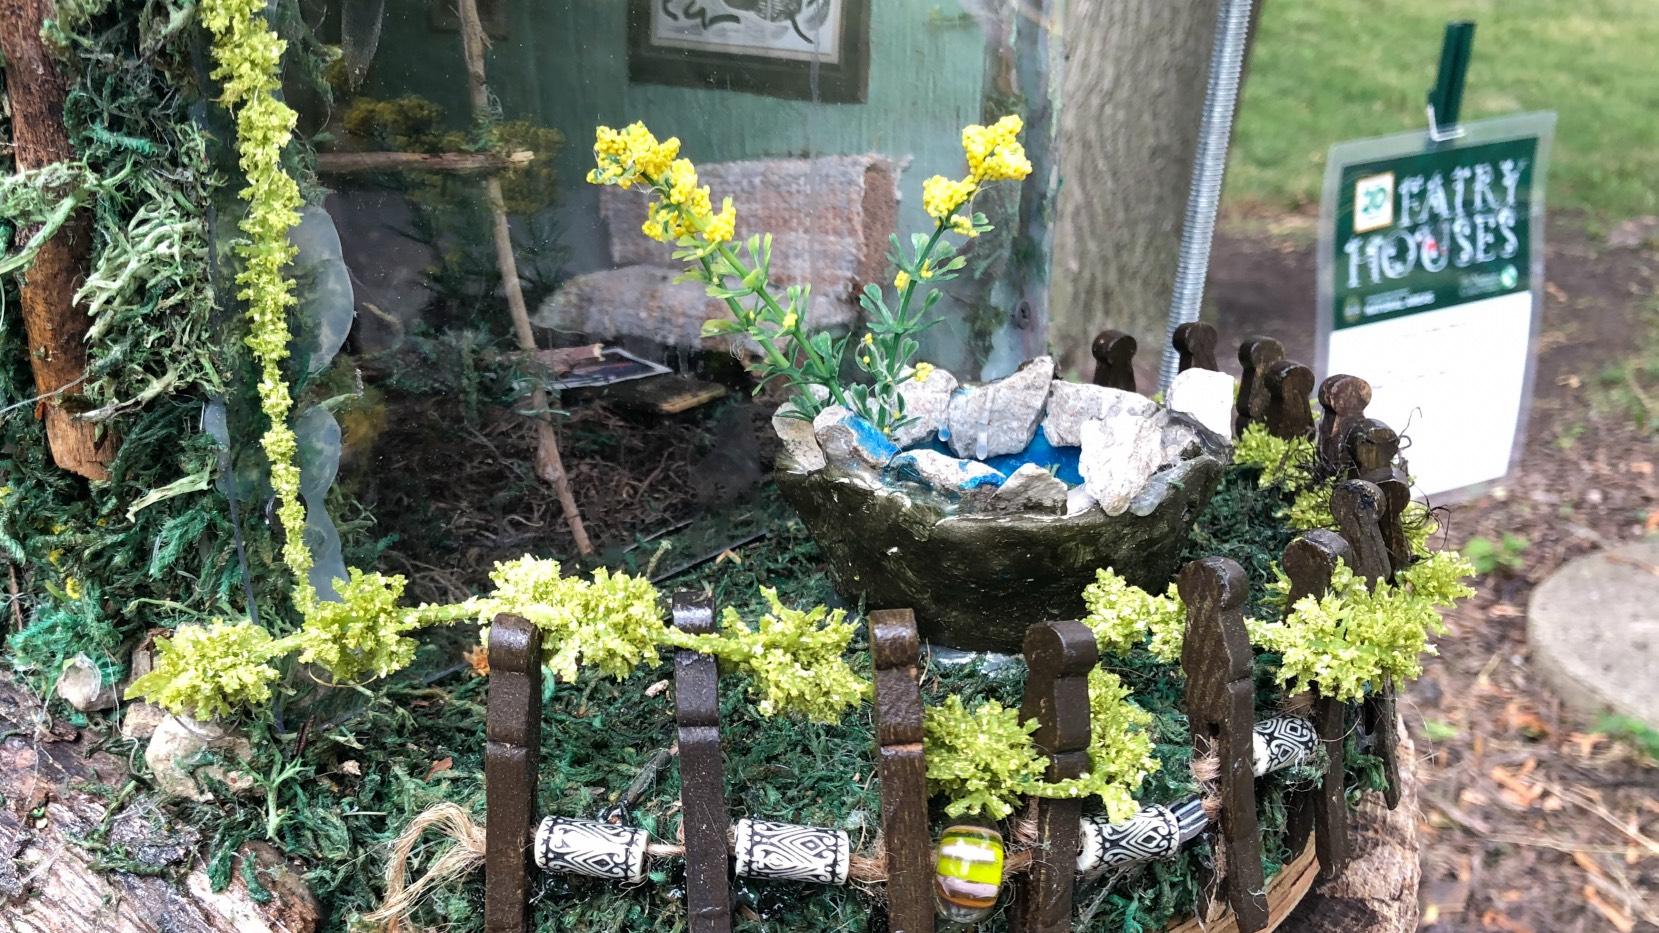 Look for the fairy houses, 20 in all, spread around the city at Chicago Park District natural areas, which are celebrating two decades of stewardship this year. (Patty Wetli / WTTW News)